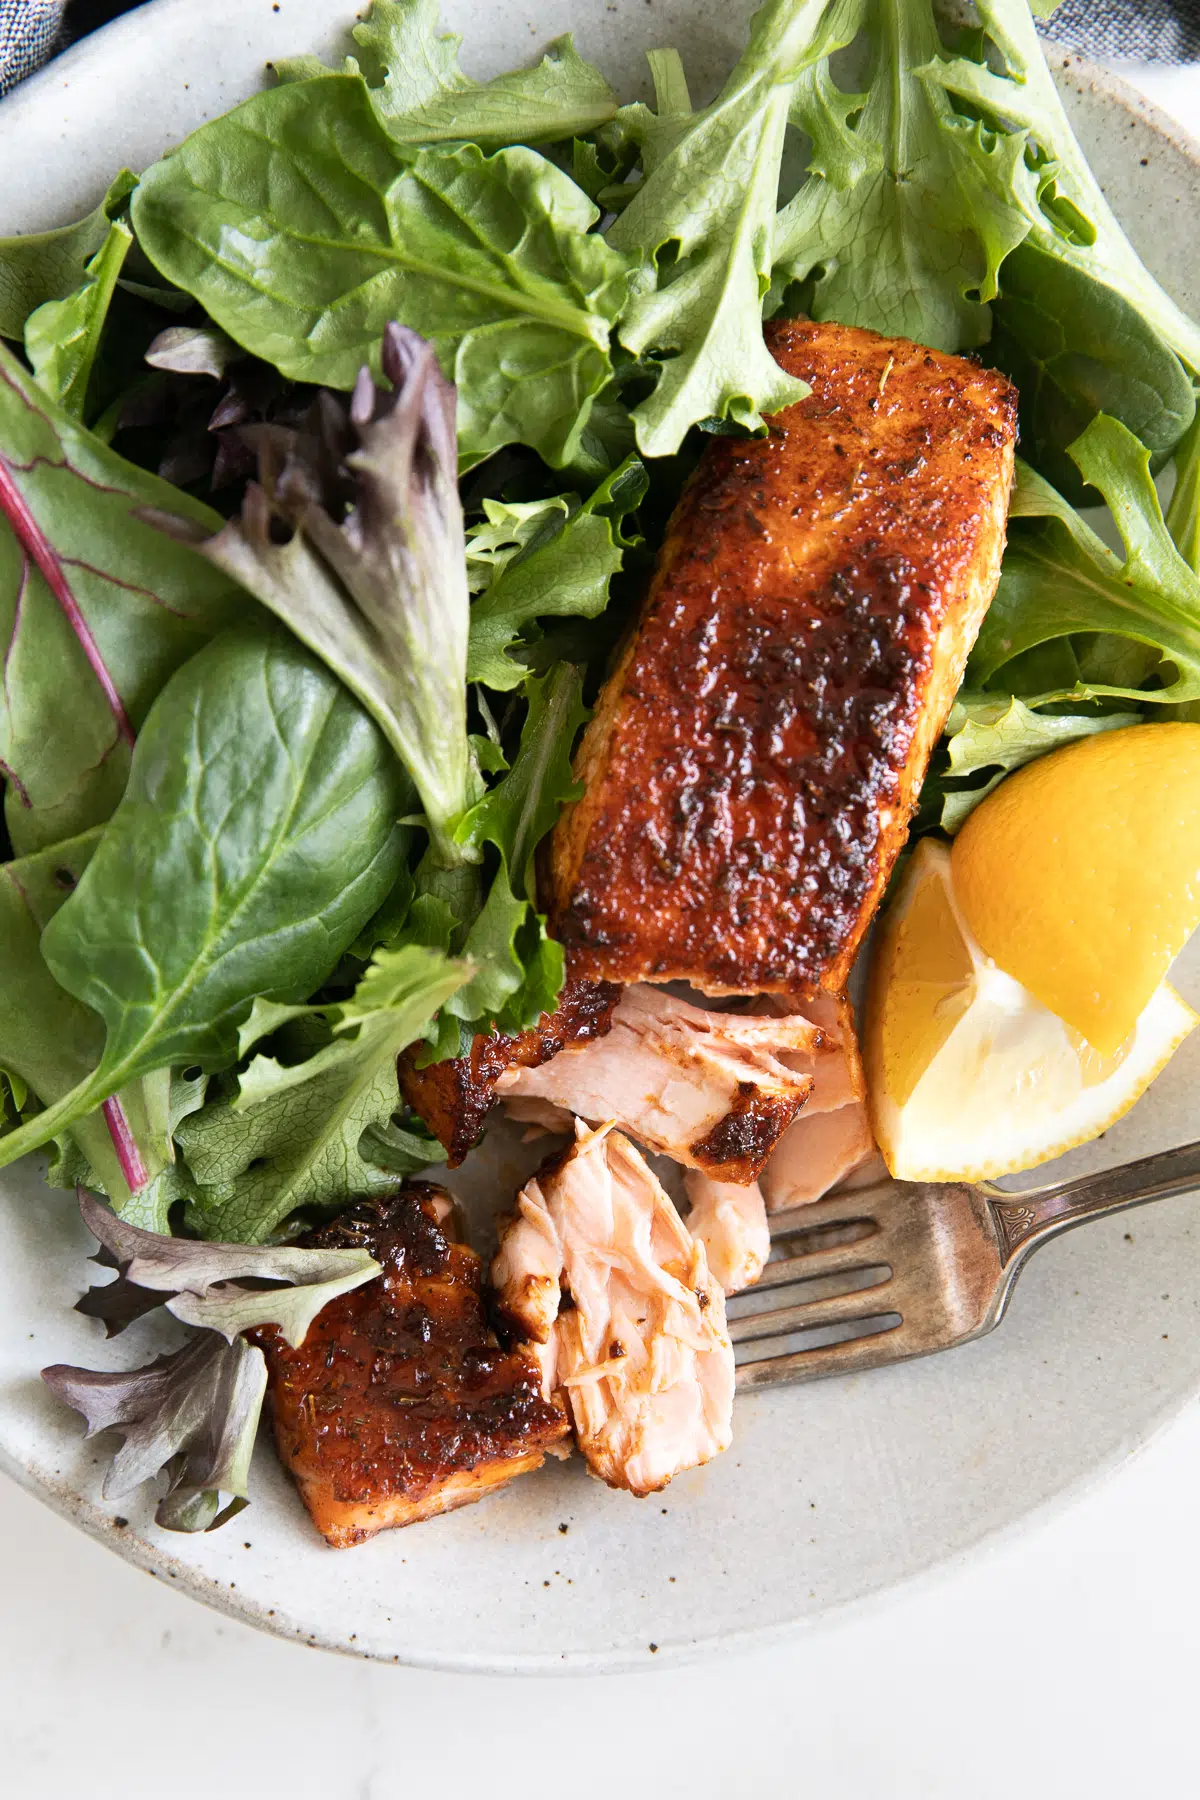 Serving plate with one salmon fillet and fresh greens.